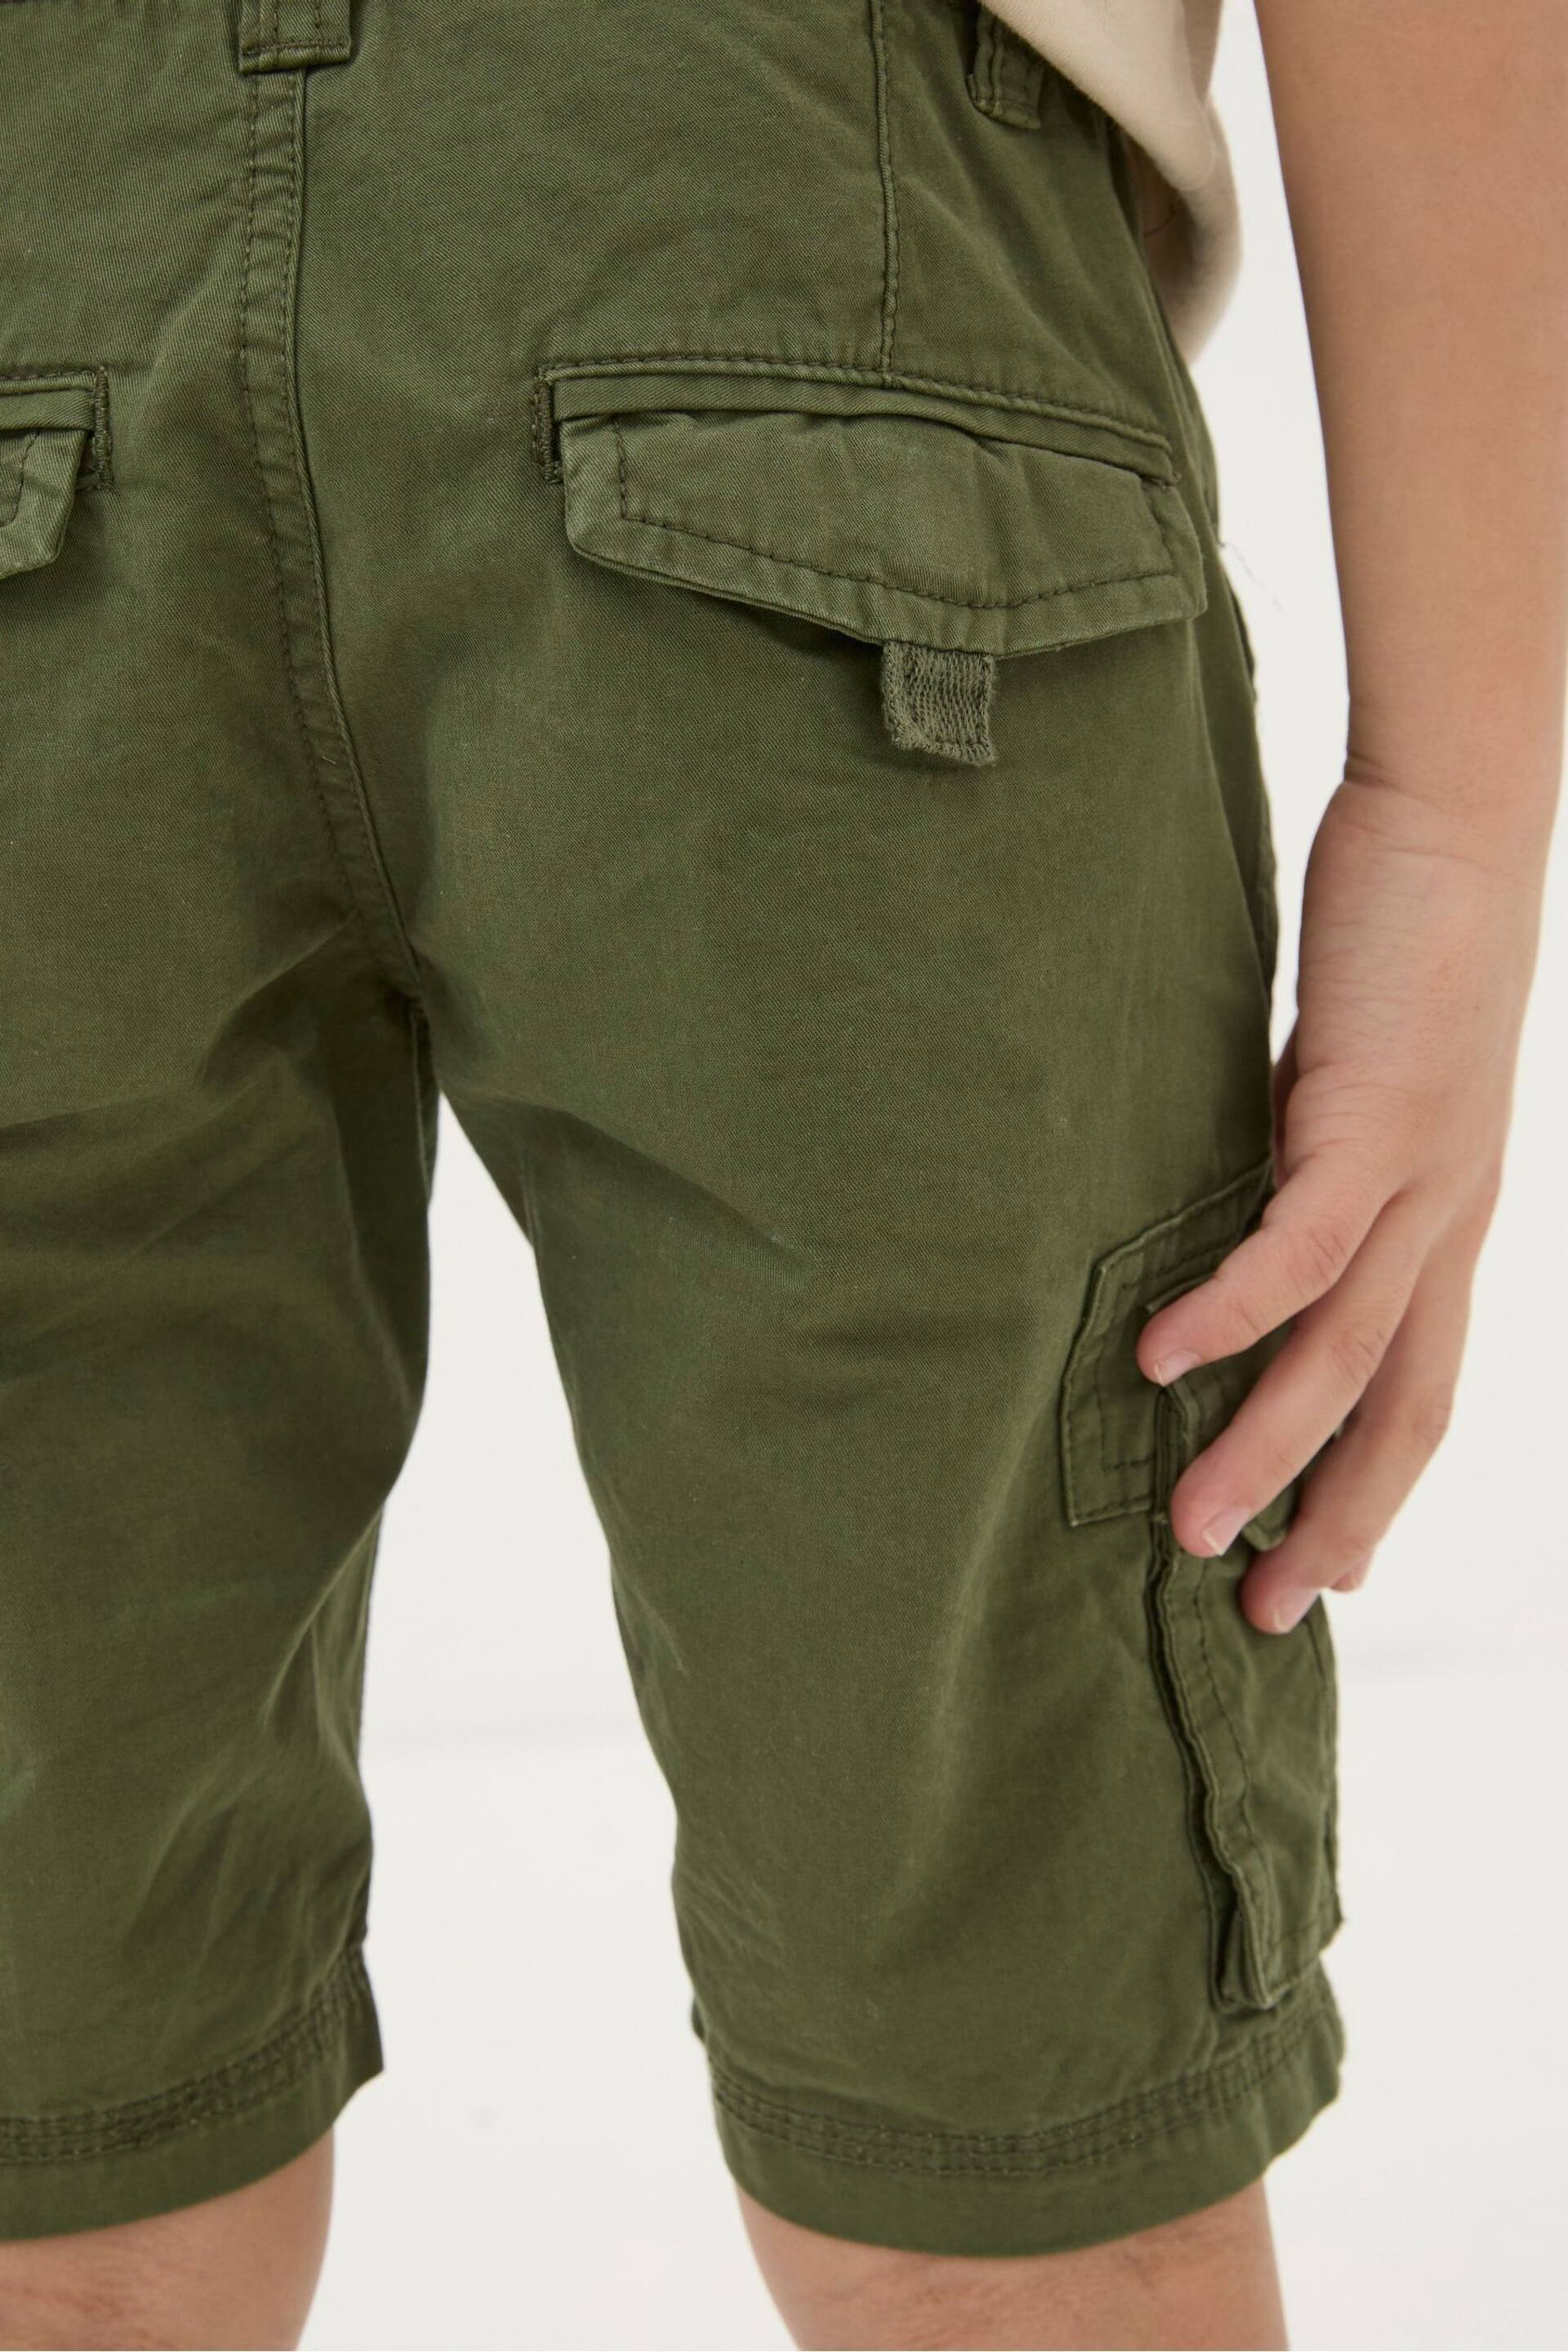 FatFace Green Lulworth Cargo Shorts - Image 4 of 5